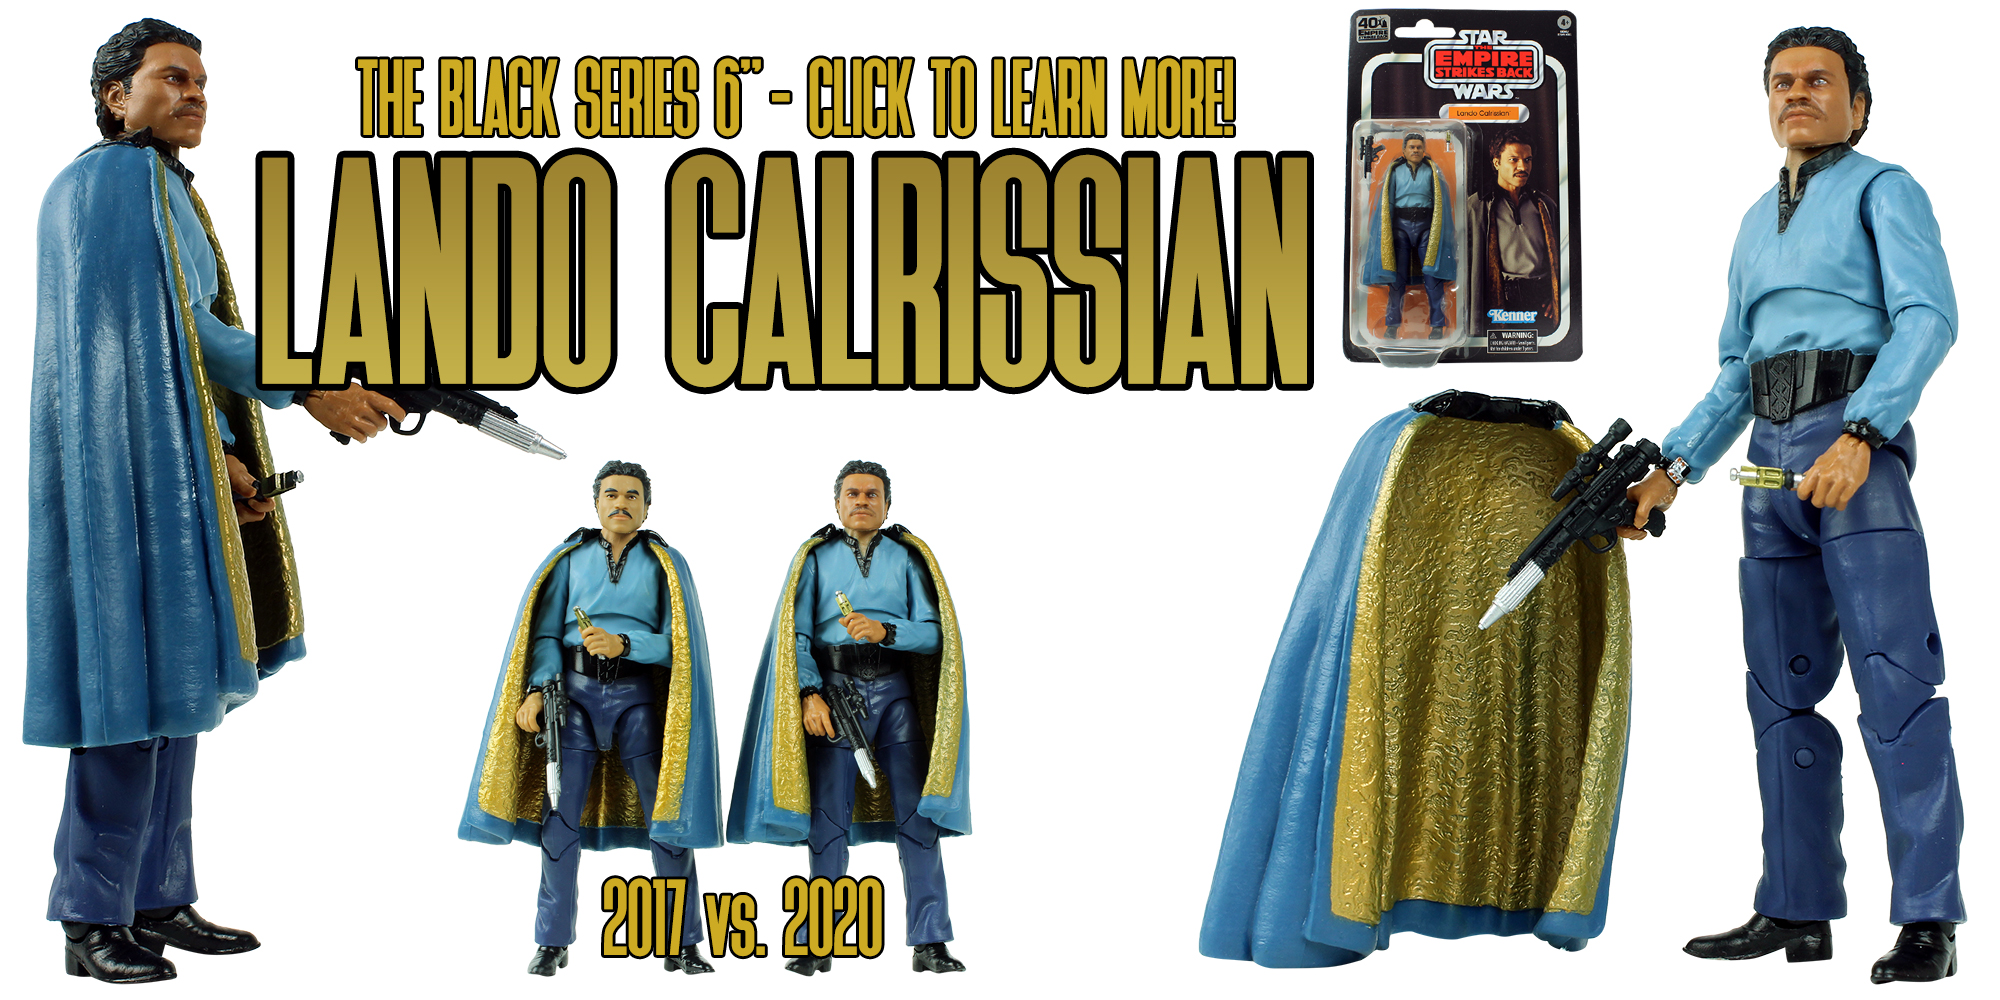 The Black Series 6" 40th Anniversary Lando Calrissian Has Been Added